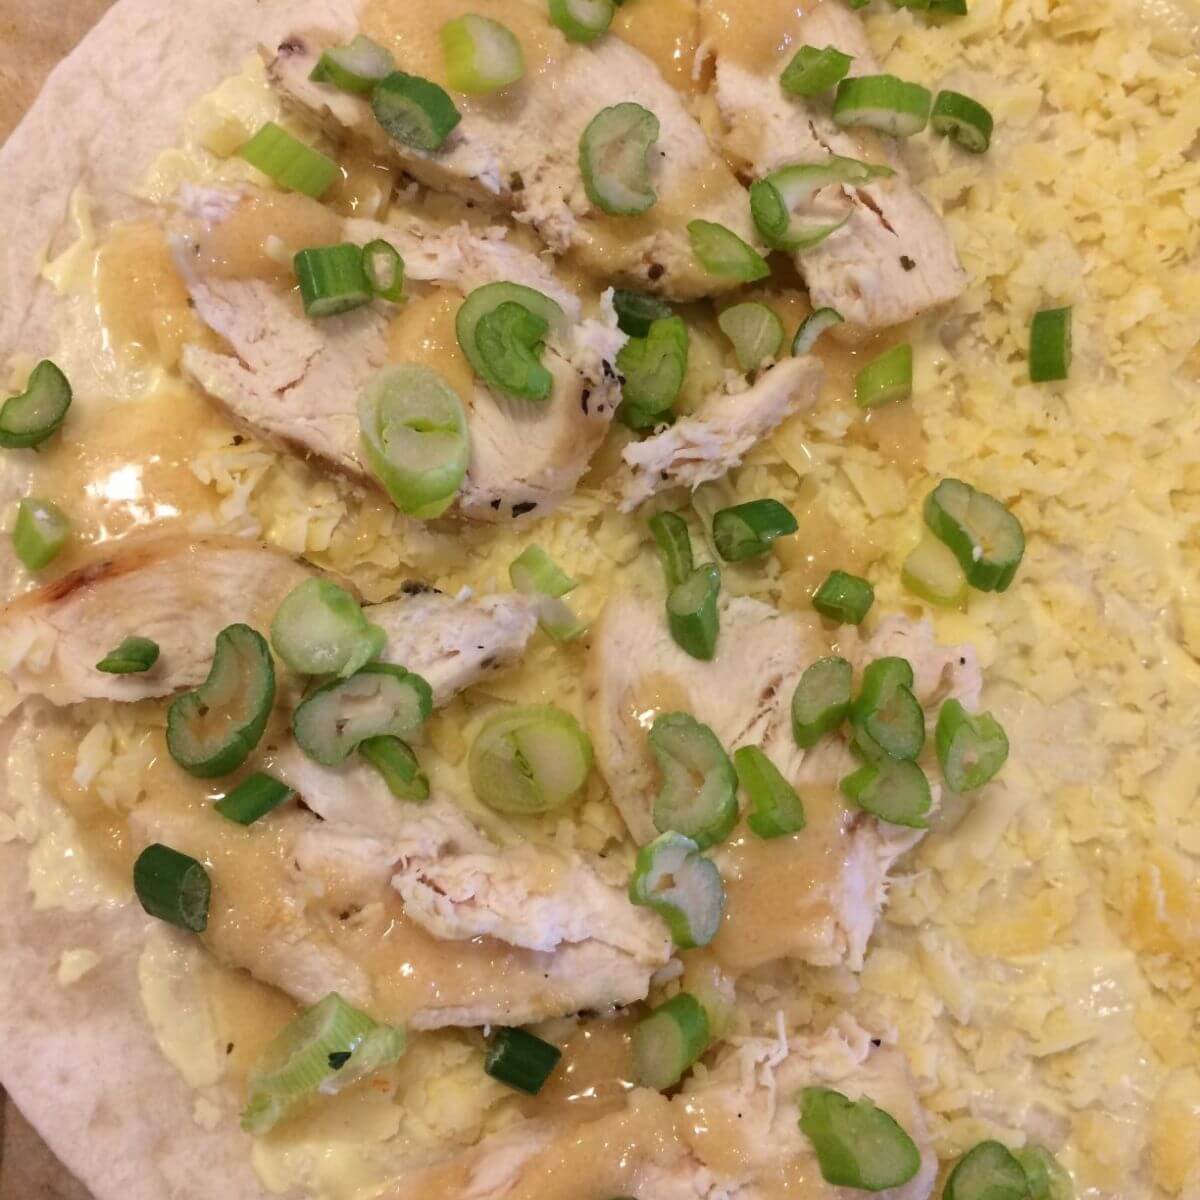 tortilla with shredded cheese, sliced green onions, chicken, and honey.